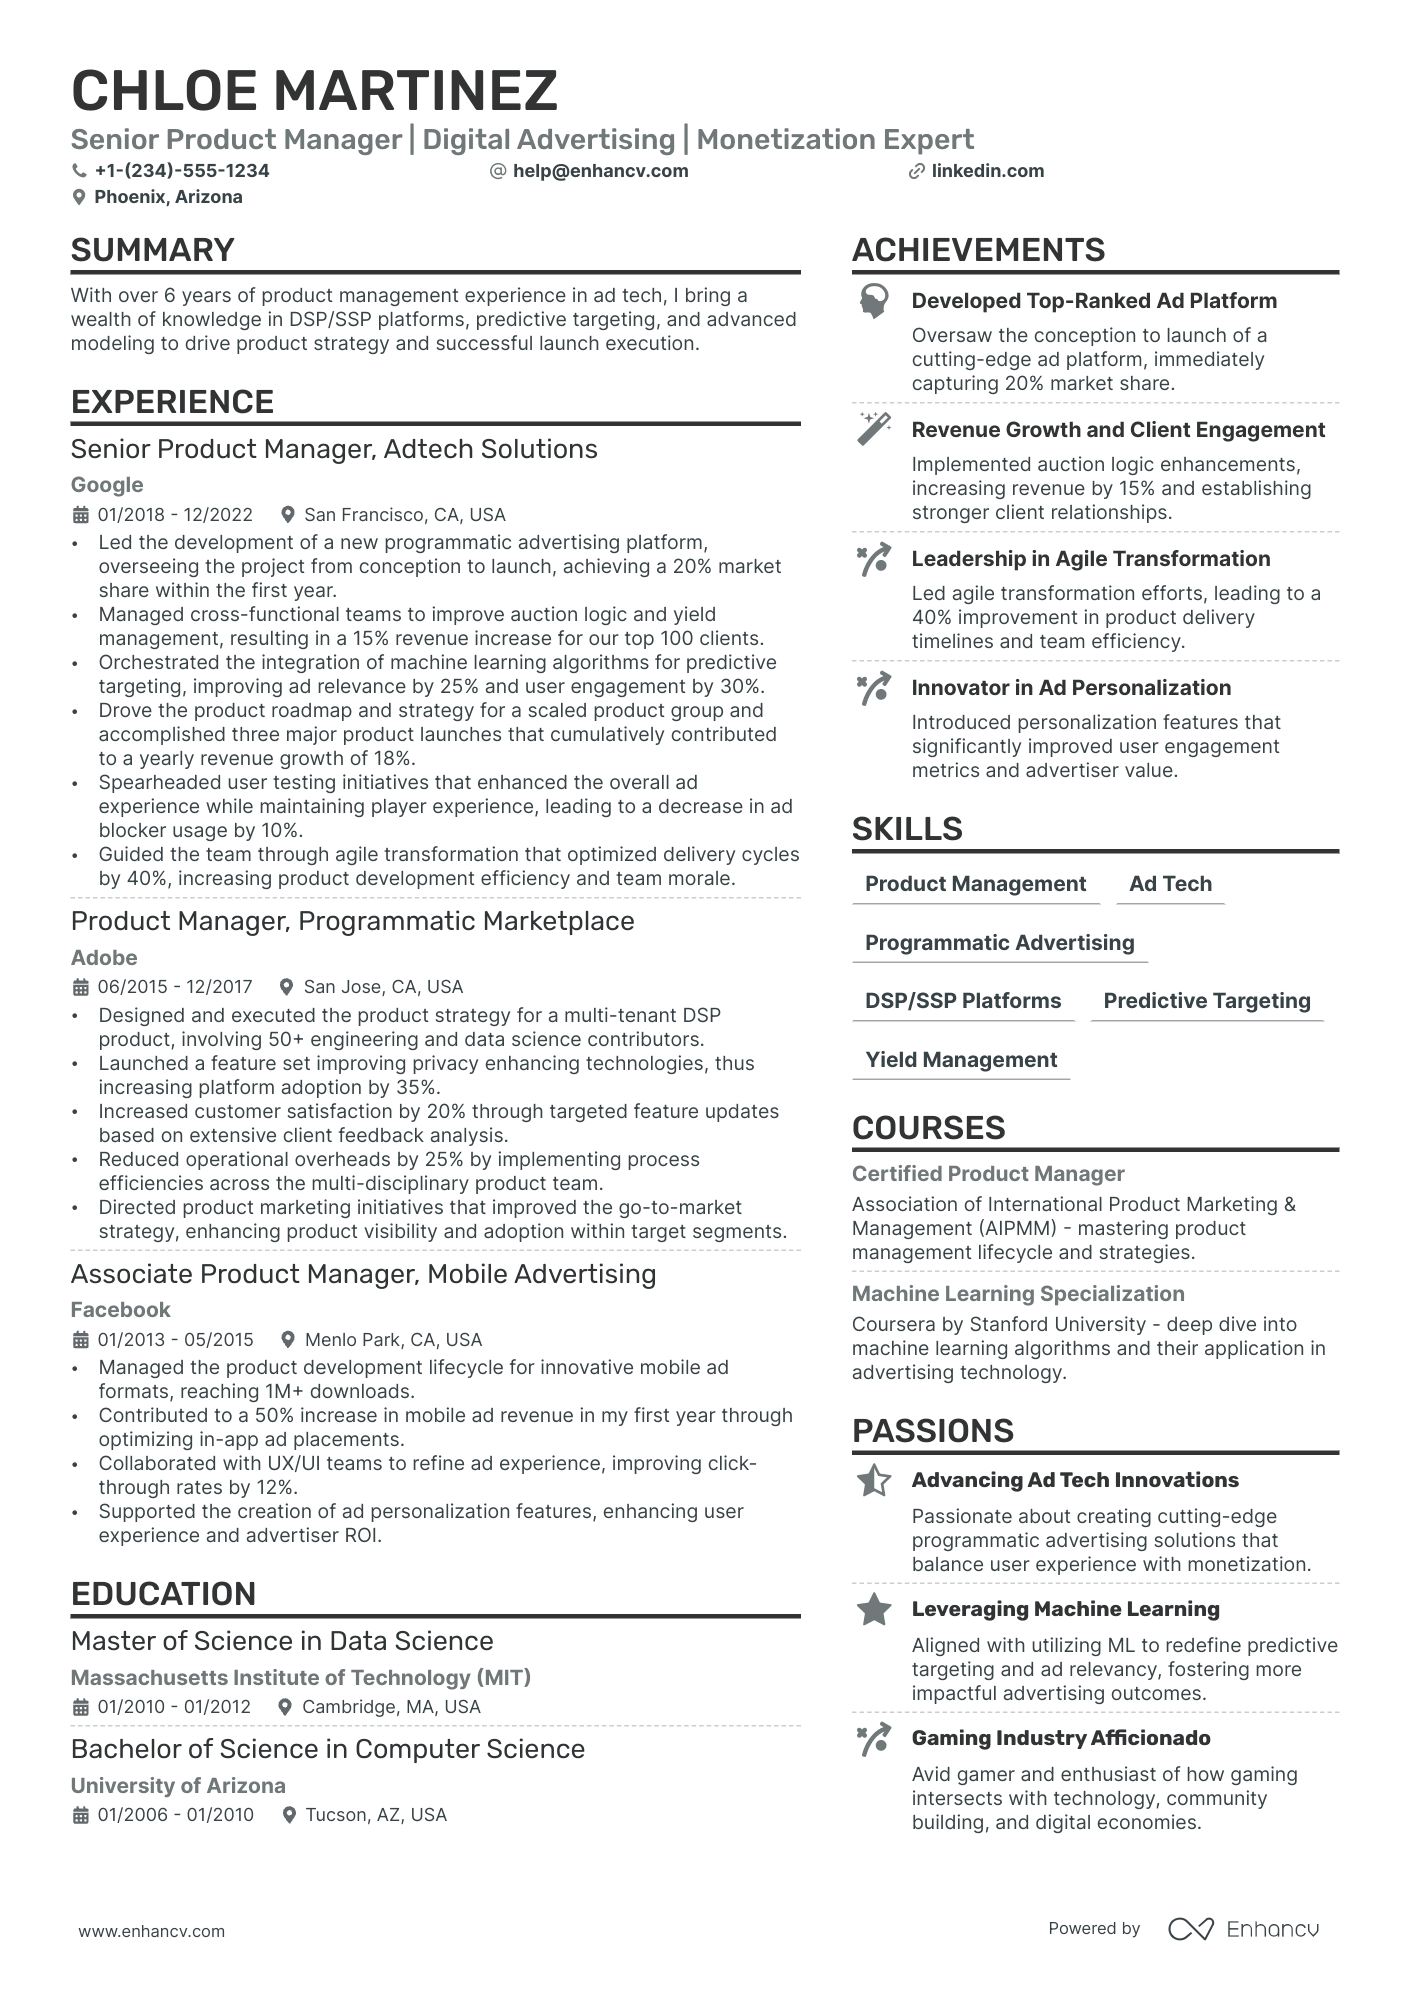 Principal Product Manager resume example